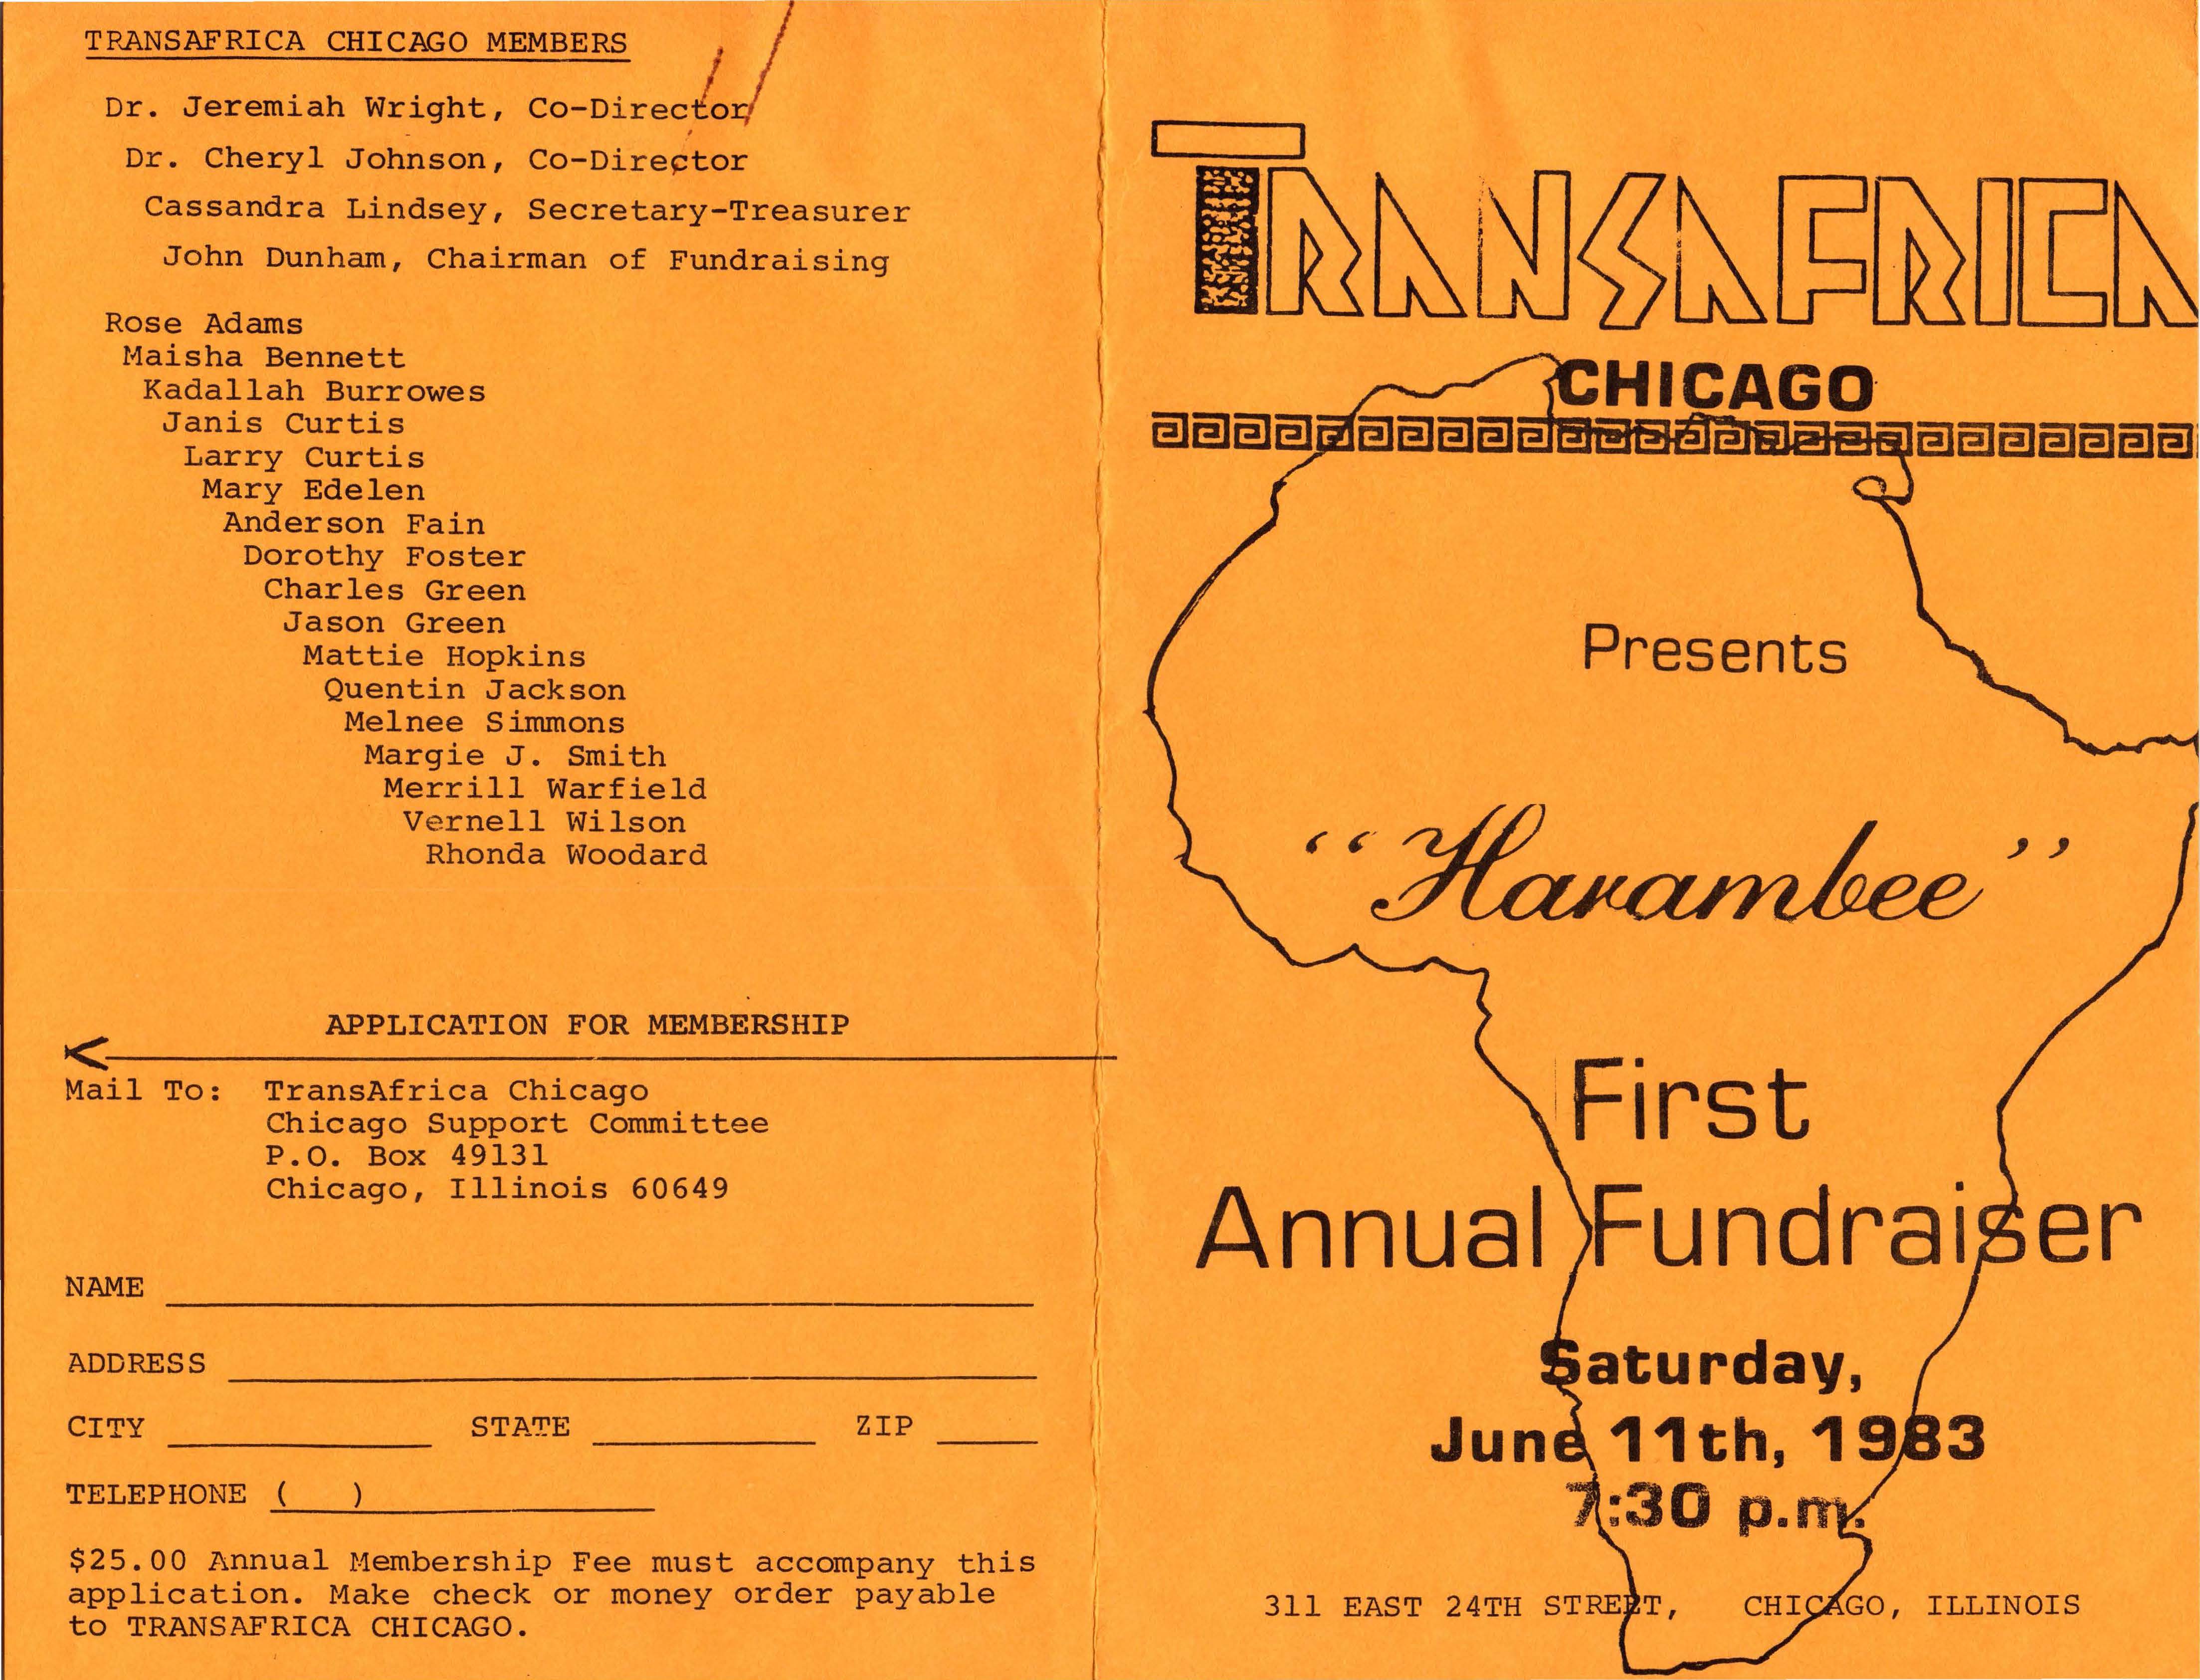 Page 1 of the Program, “Harambee” First Annual Fundraiser